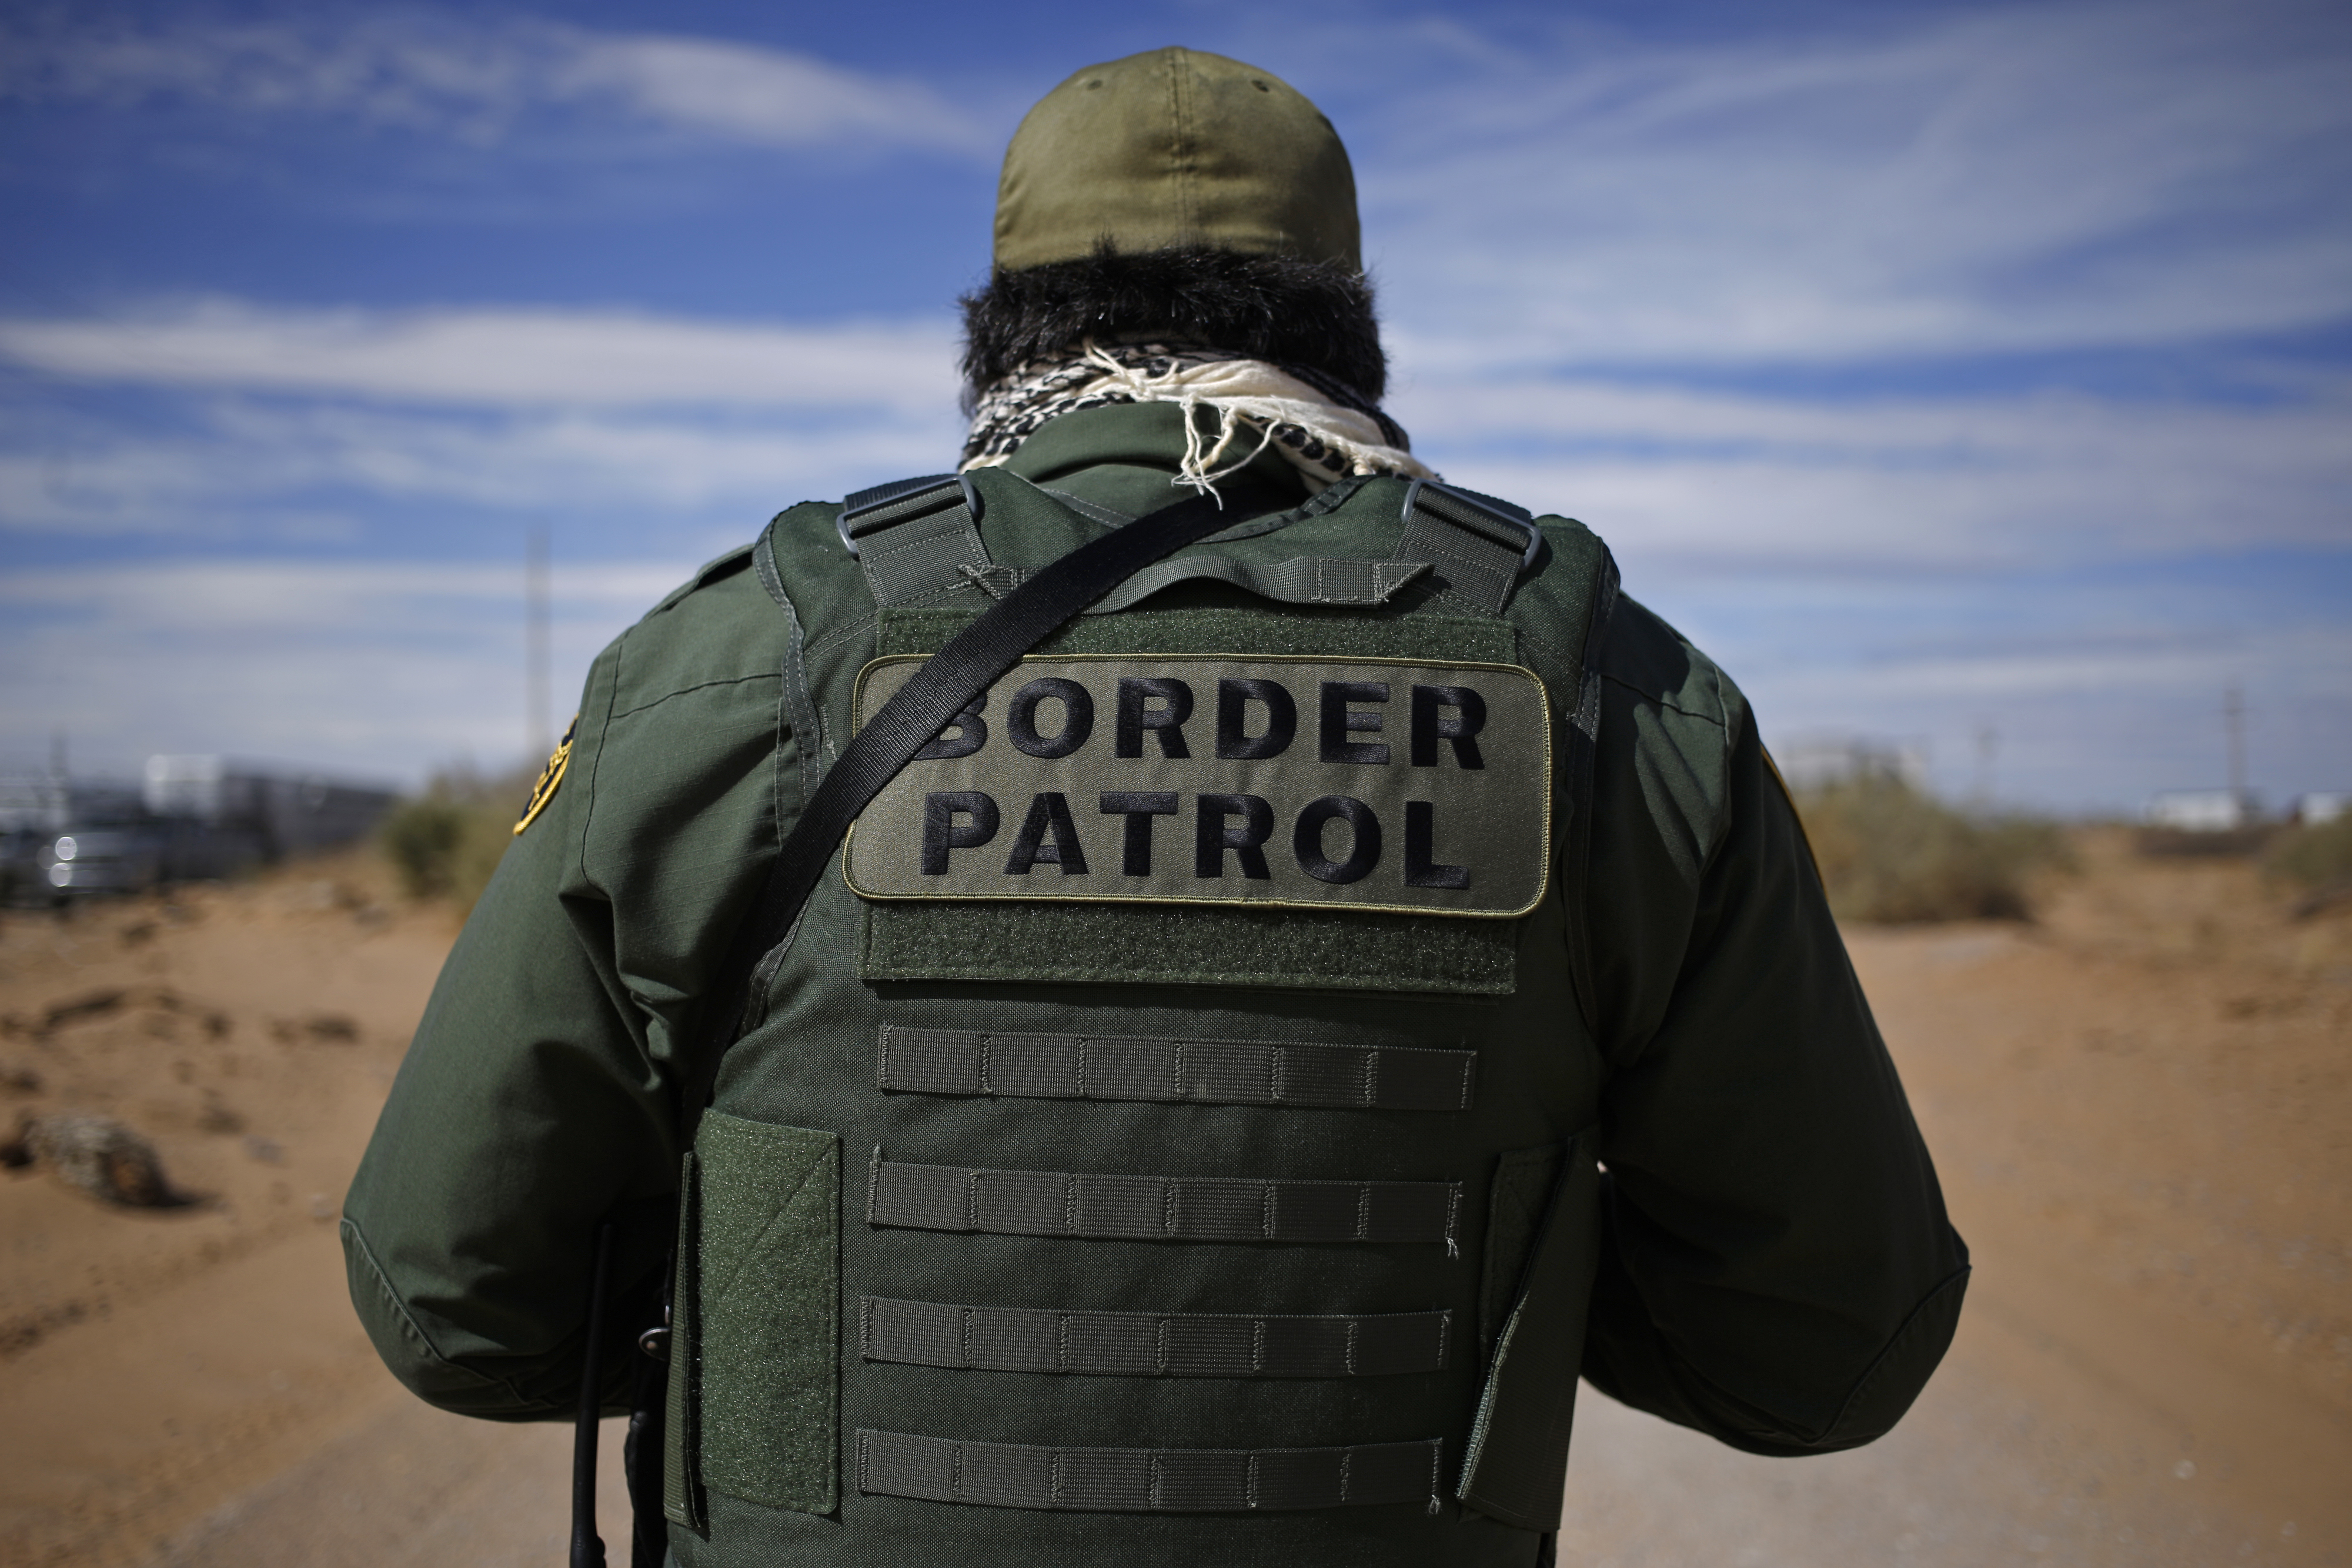 A U.S. Border Patrol agent stands for a photograph while keeping watch along the U.S. and Mexico border in Santa Teresa, New Mexico, U.S., on Friday, Feb. 17, 2017. (Luke Sharrett&mdash;Bloomberg/Getty Images)